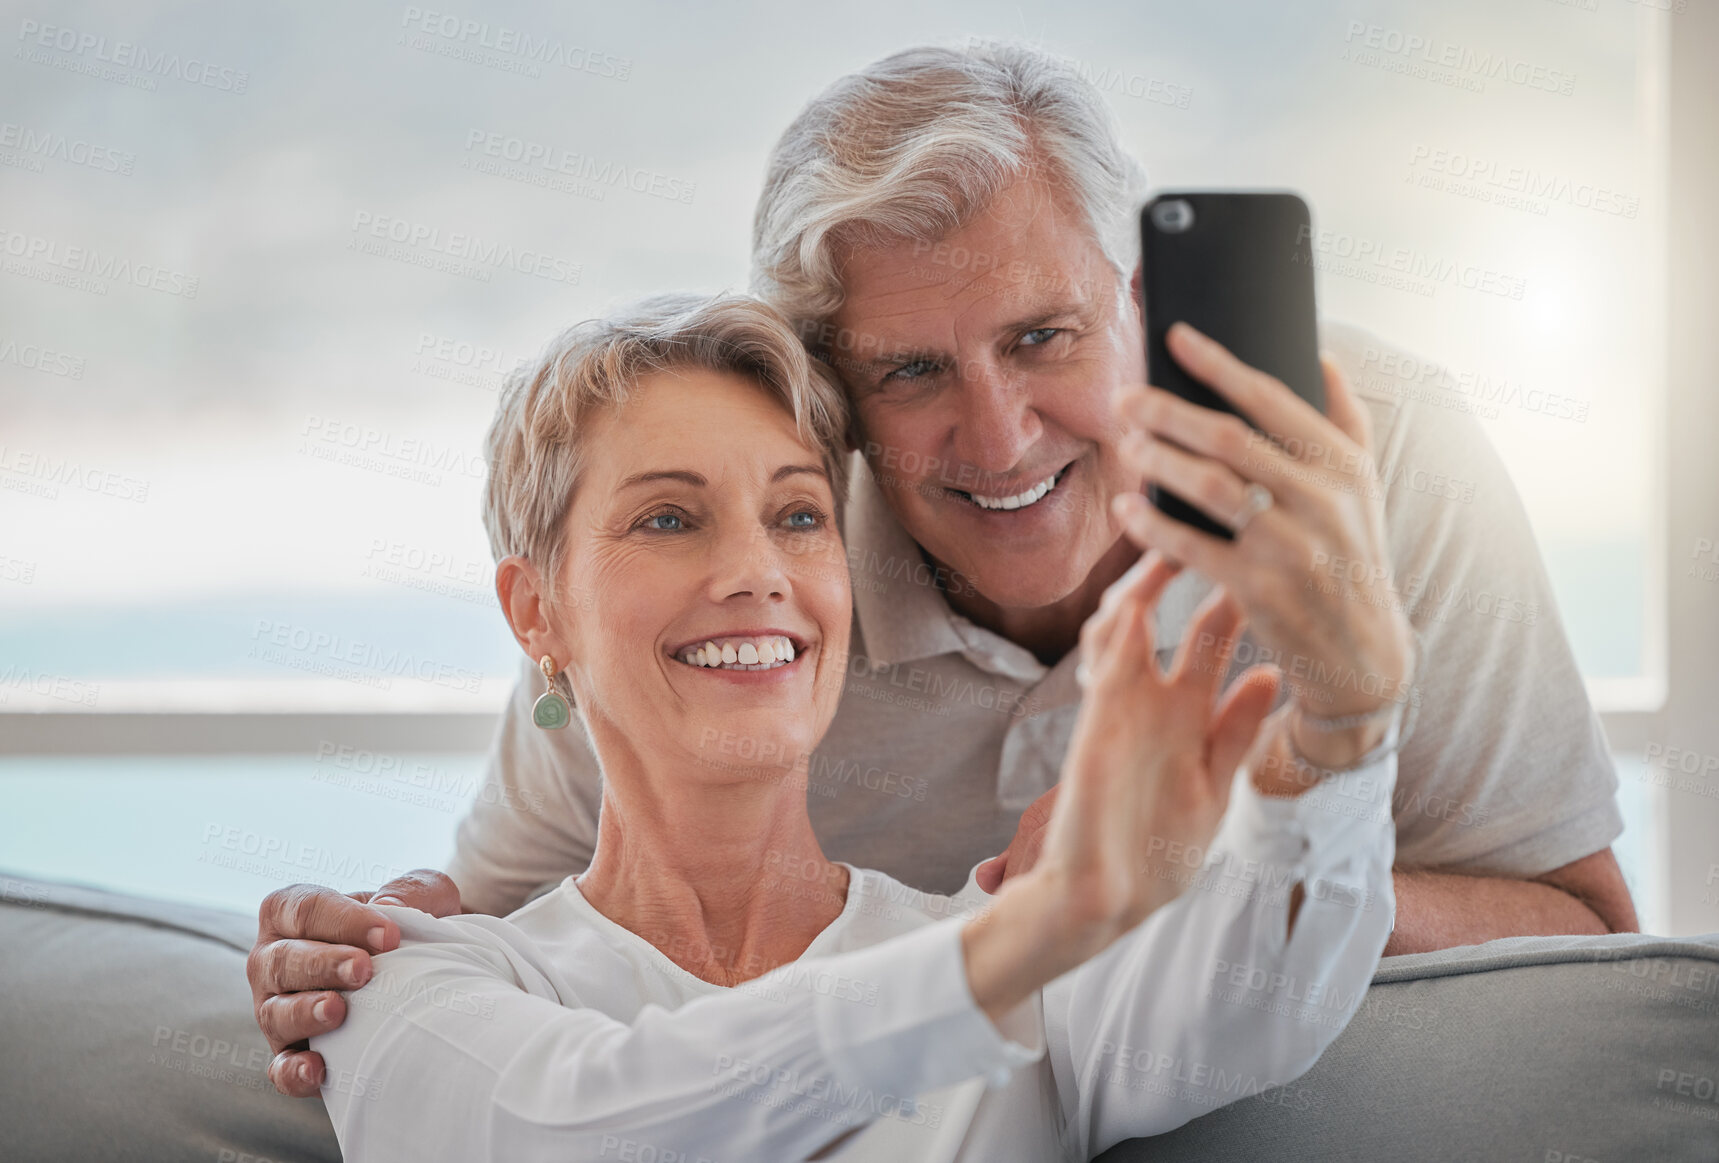 Buy stock photo Cropped shot of an affectionate senior couple taking selfies while relaxing in the living room at home